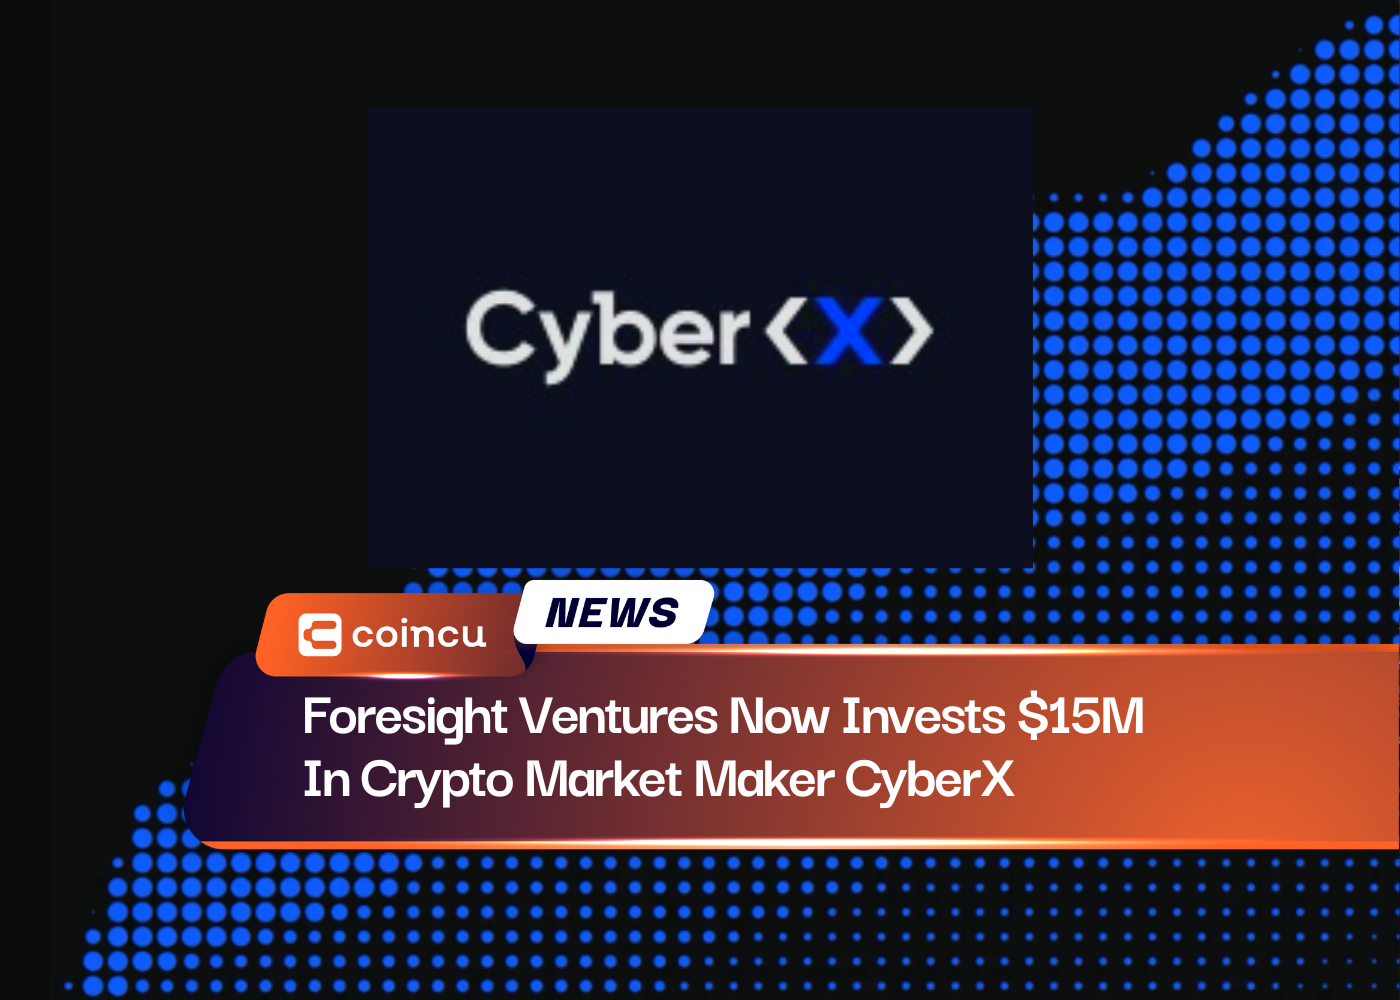 Foresight Ventures Now Invests $15M In Crypto Market Maker CyberX